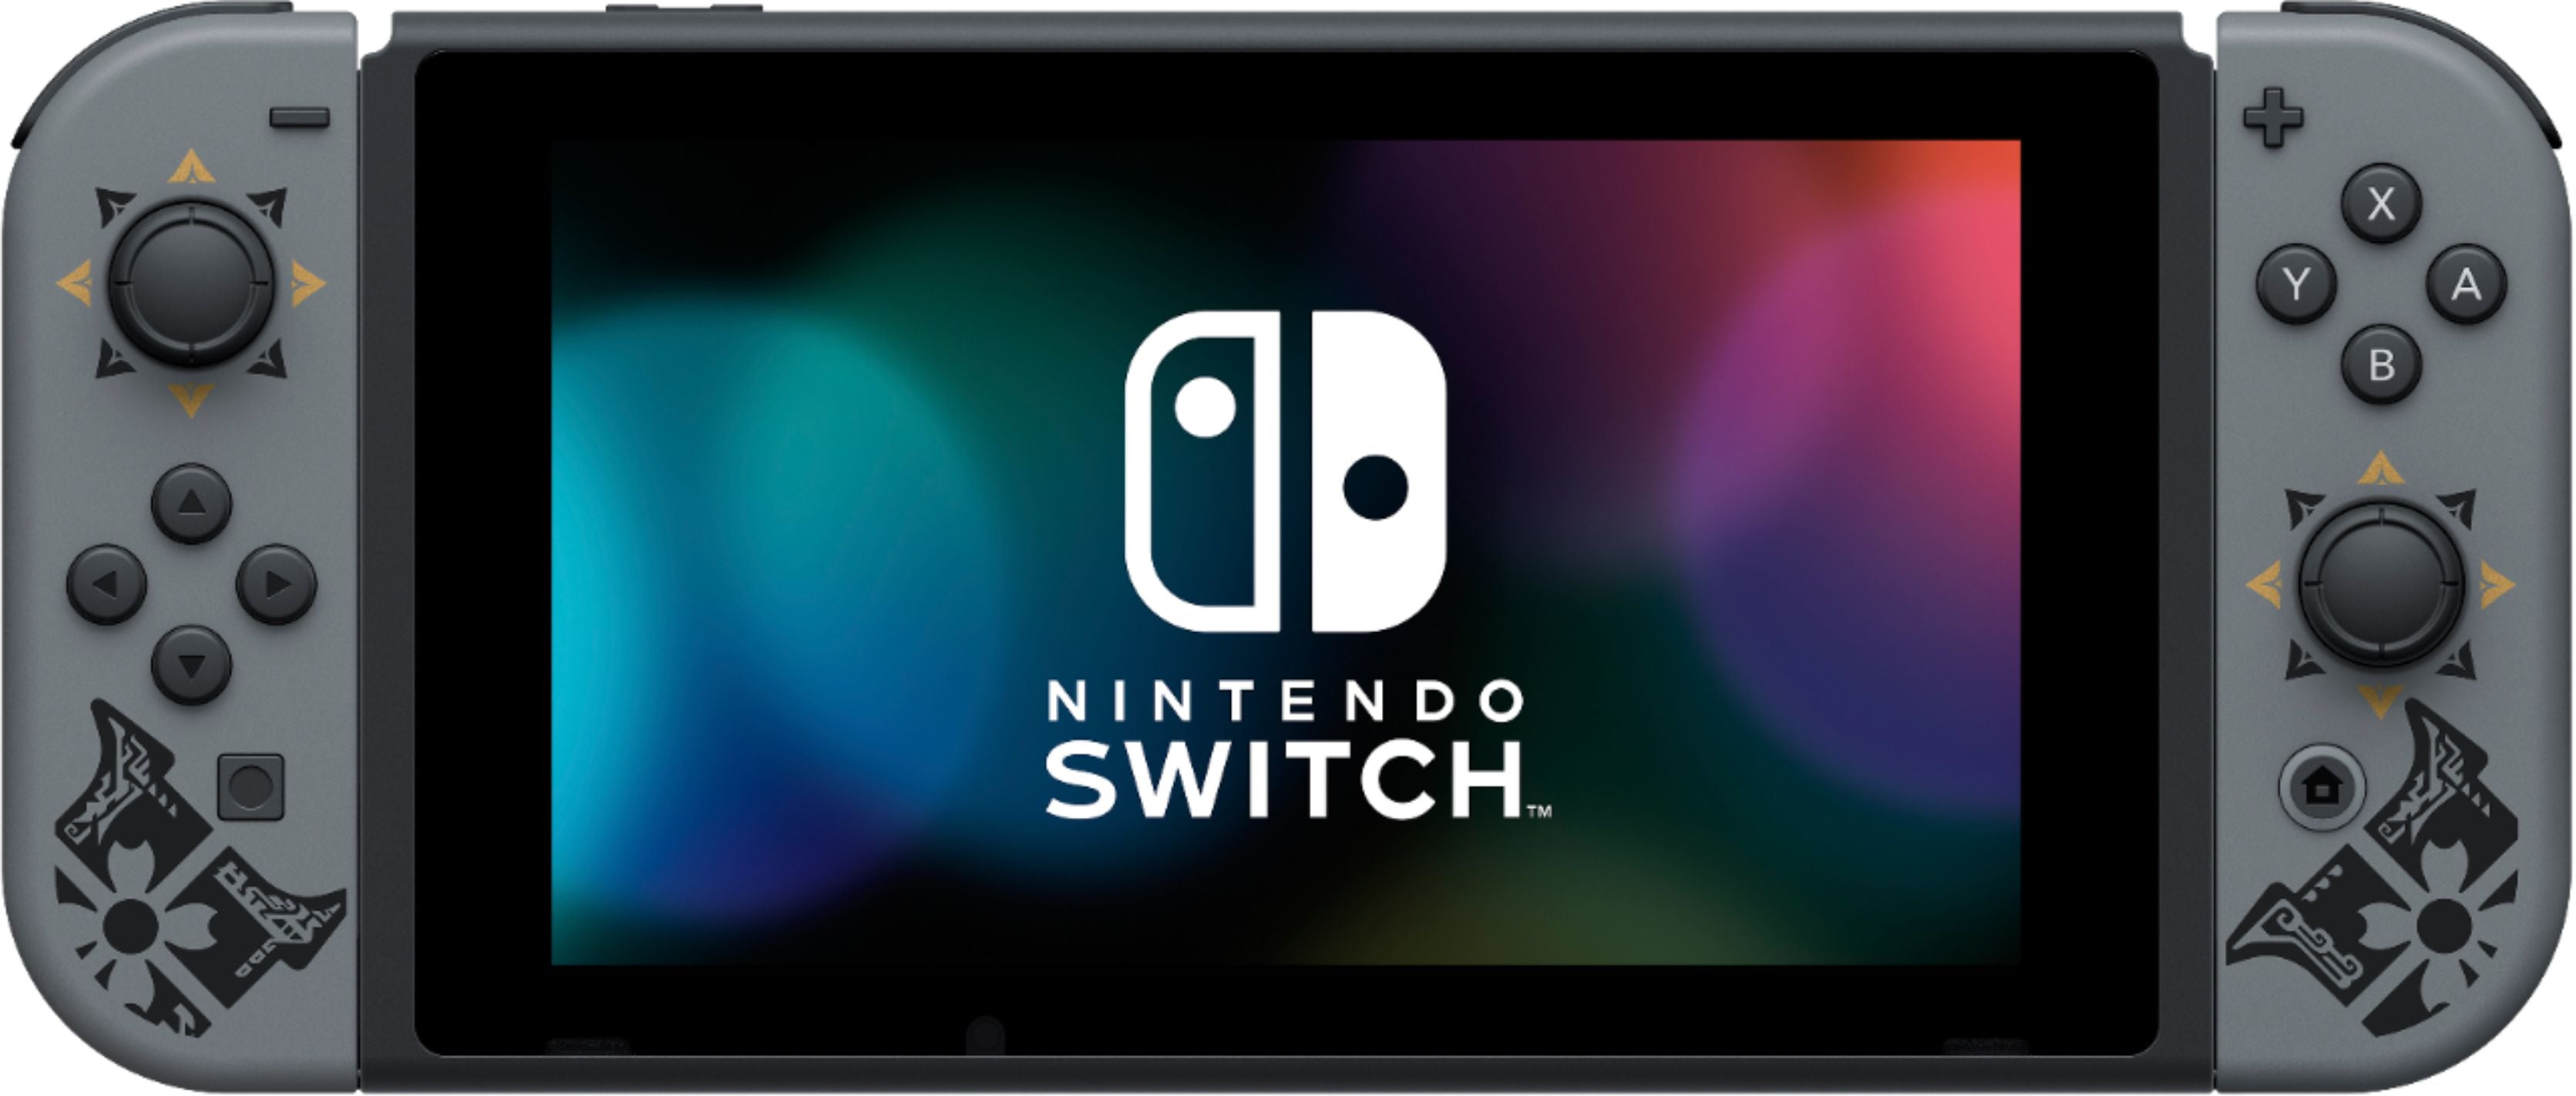 Orion by Up-Switch fully integrated Nintendo Switch portable HD 11.6 inch  IPS Monitor, with USB Type-C and HDMI in for PS5, XBOX, Laptop, Smartphone